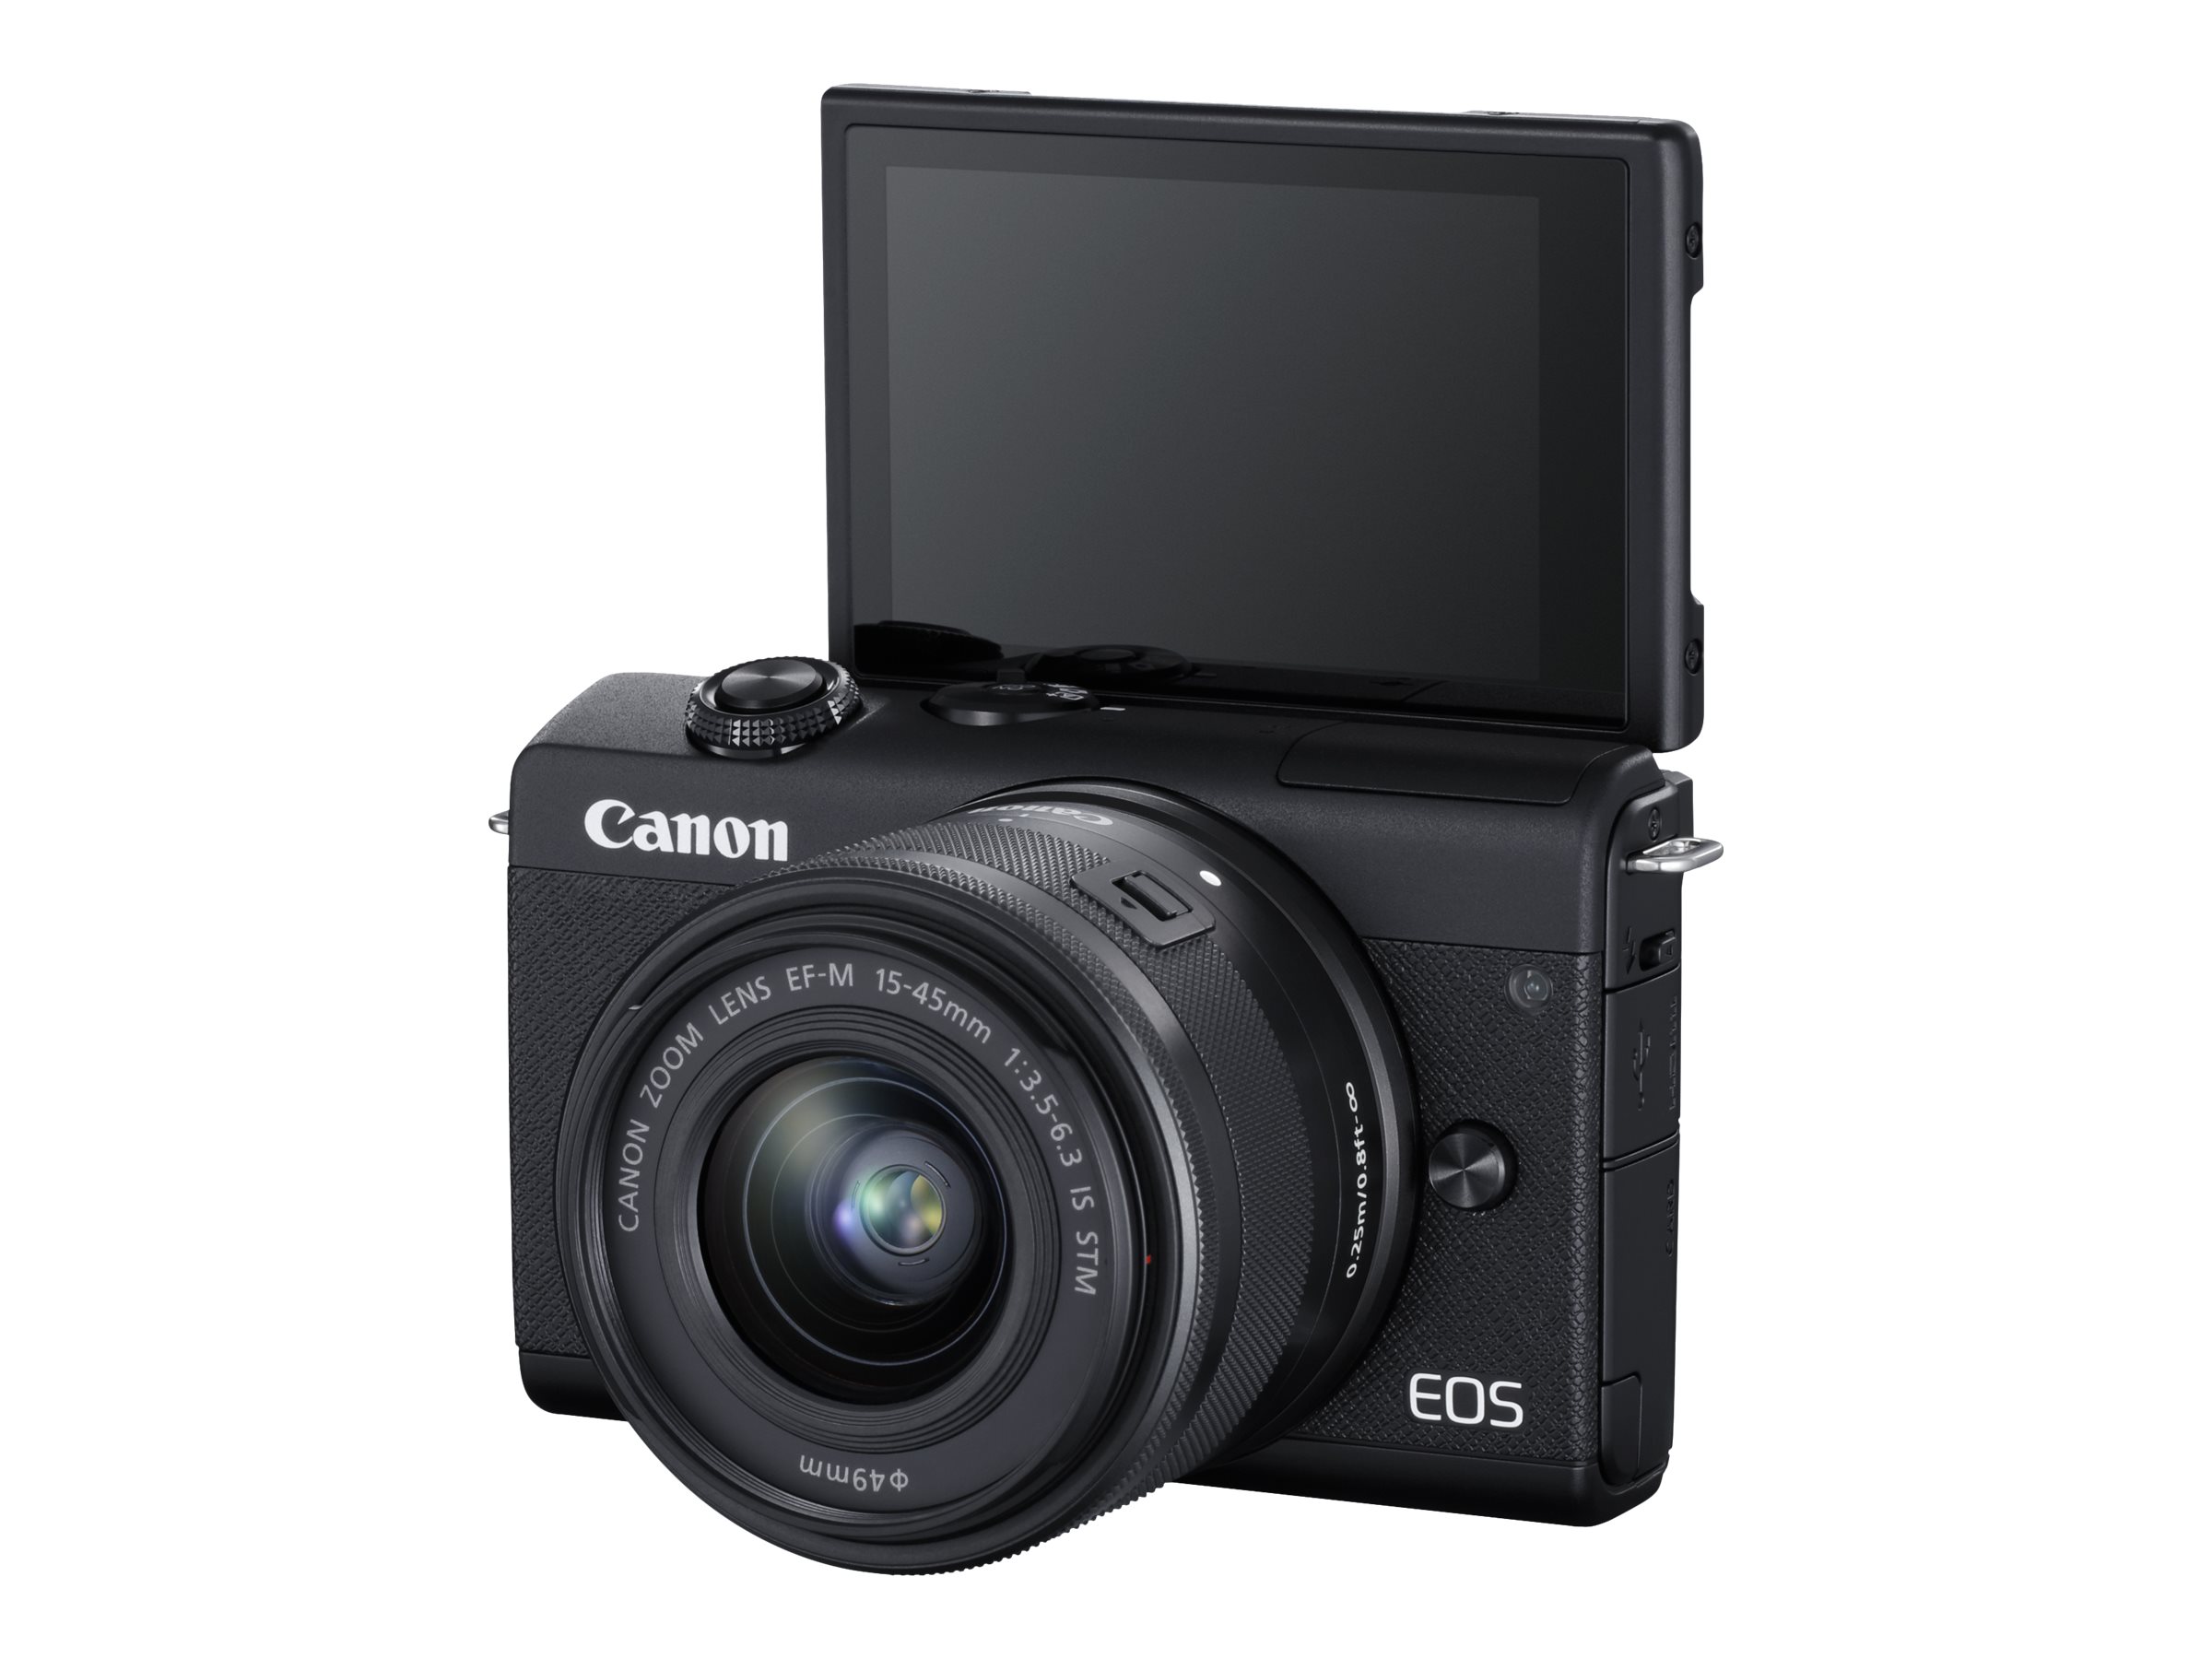 Canon EOS M200 - Digital camera - mirrorless - 24.1 MP - APS-C - 4K / 25 fps - 3x optical zoom EF-M 15-45mm IS STM lens - Wi-Fi, Bluetooth - black - image 1 of 3